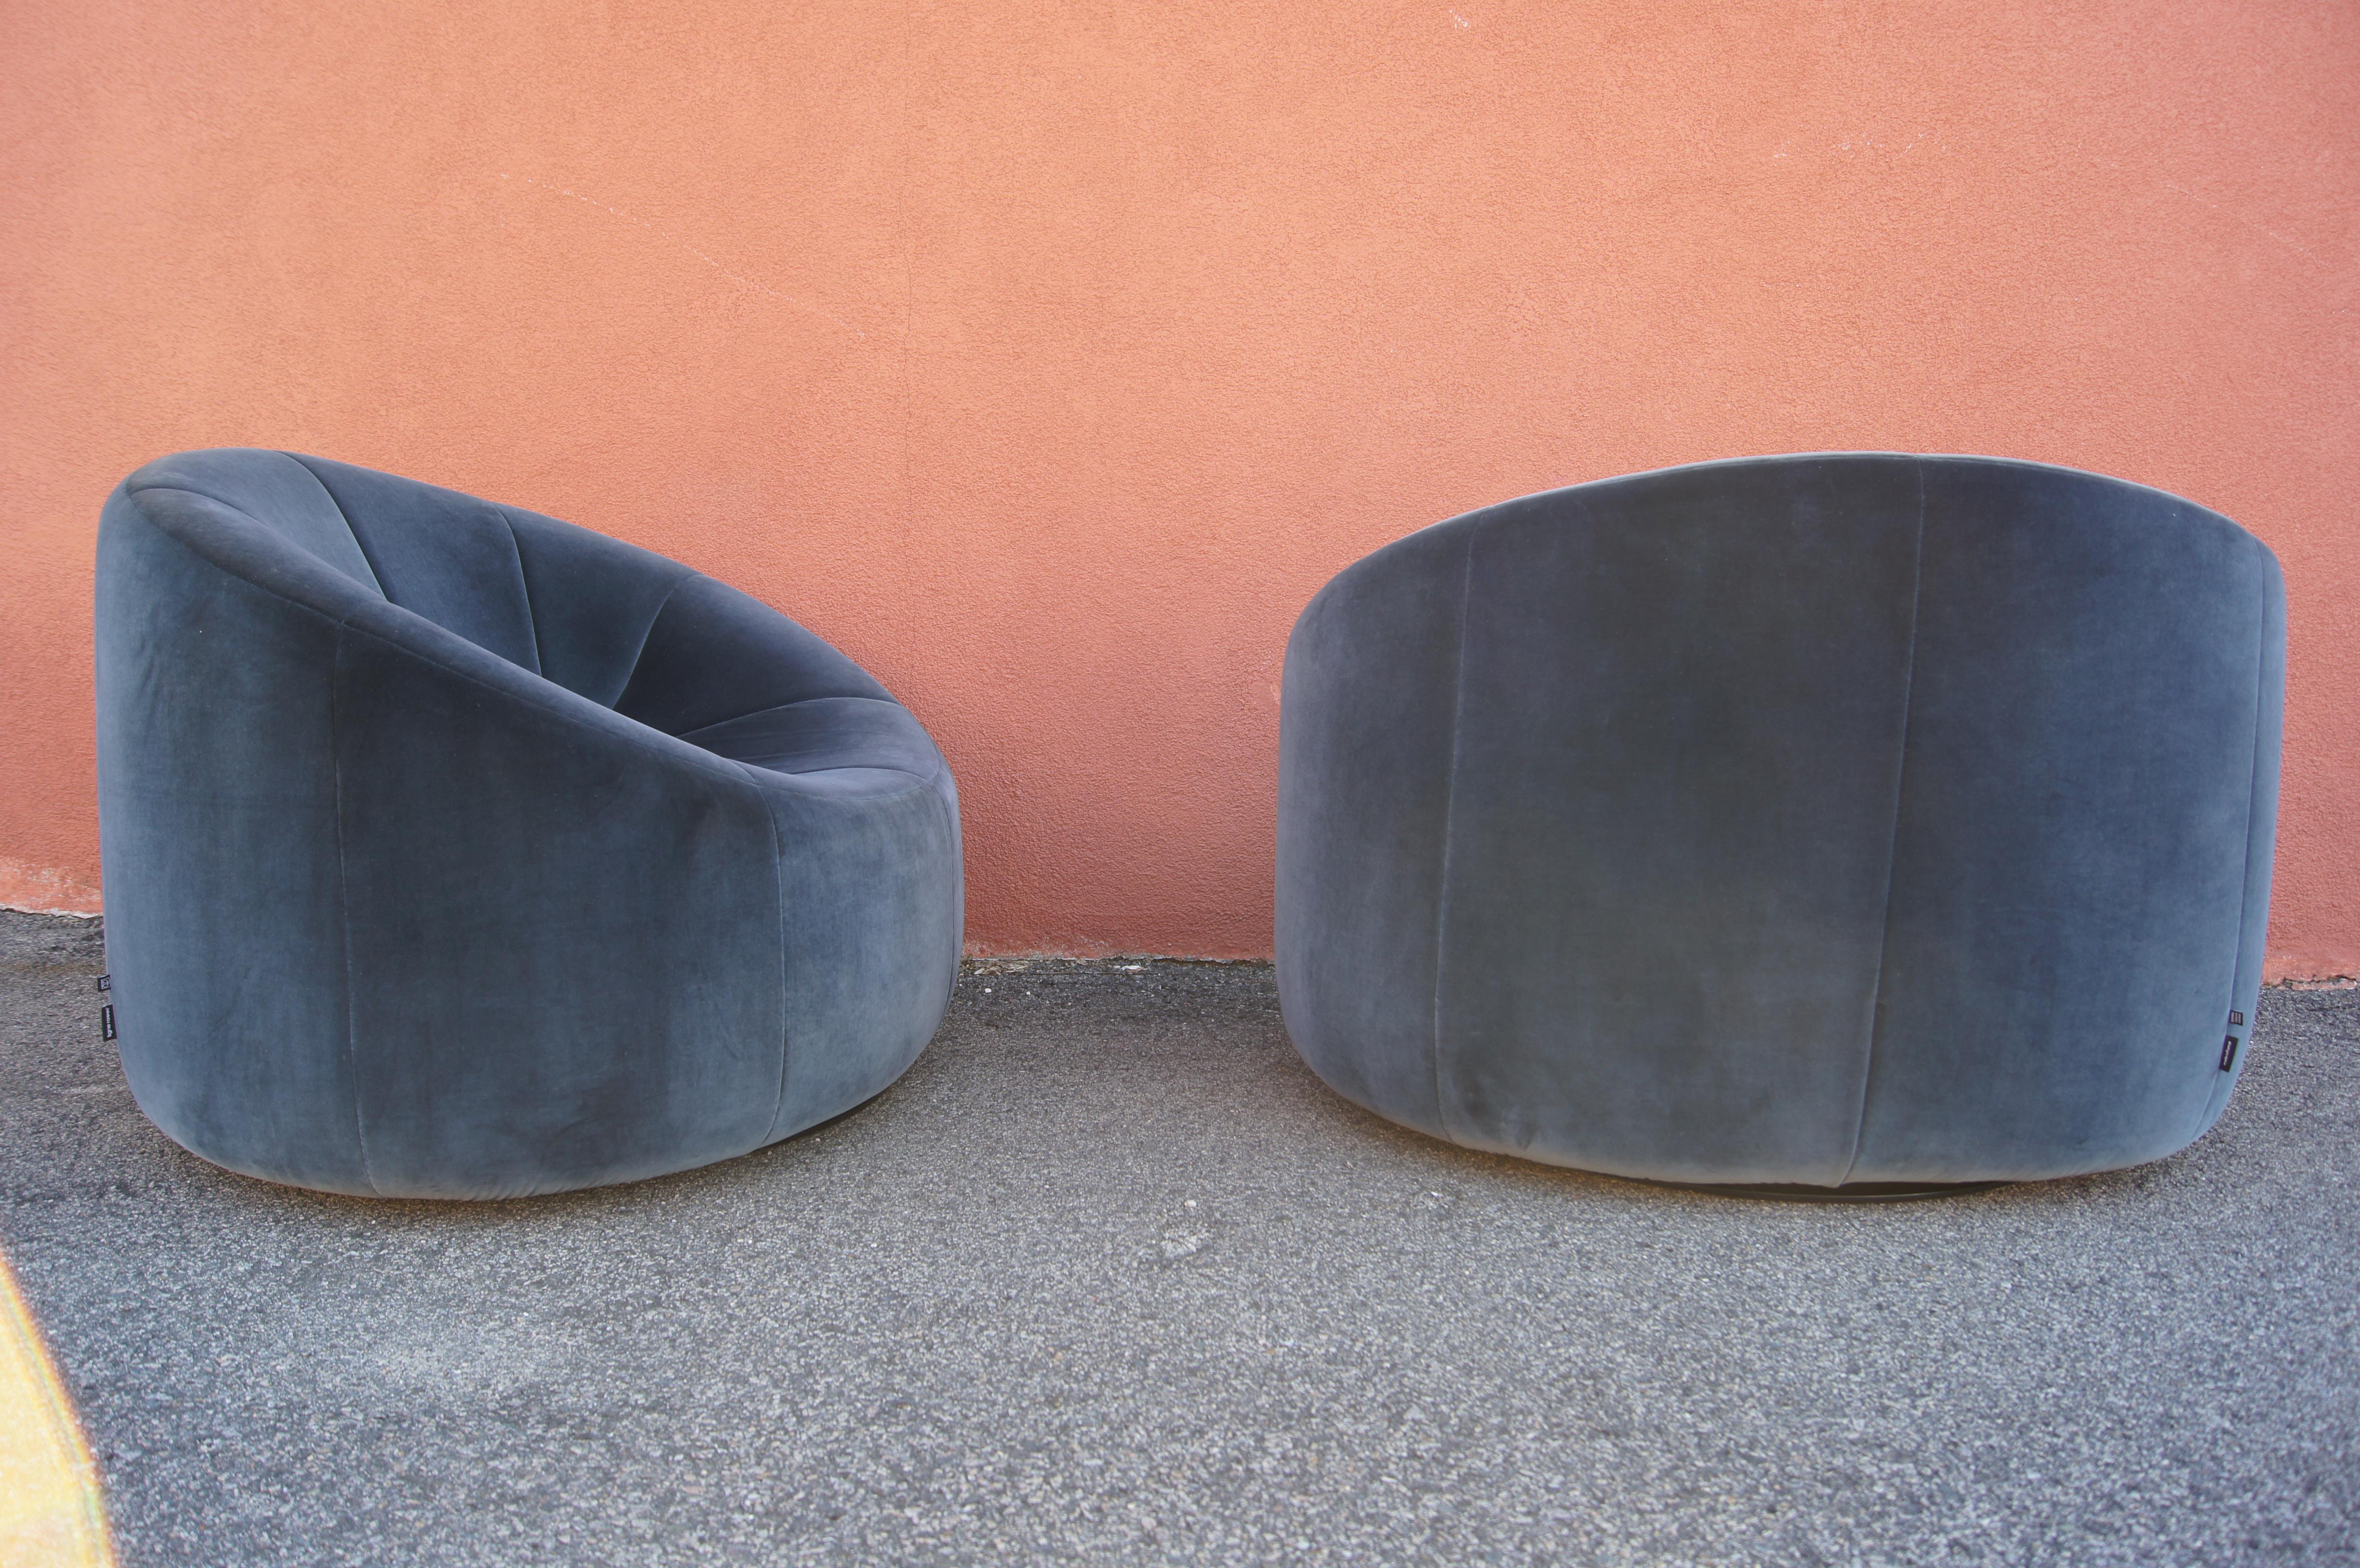 Pierre Paulin designed the iconic pumpkin armchair in the late 1960s as part of a suite for Georges Pomidou's residence at the Palais Élysée. He reissued it in 2007 for Ligne Roset.

Made of molded polyurethane with a swiveling base, here